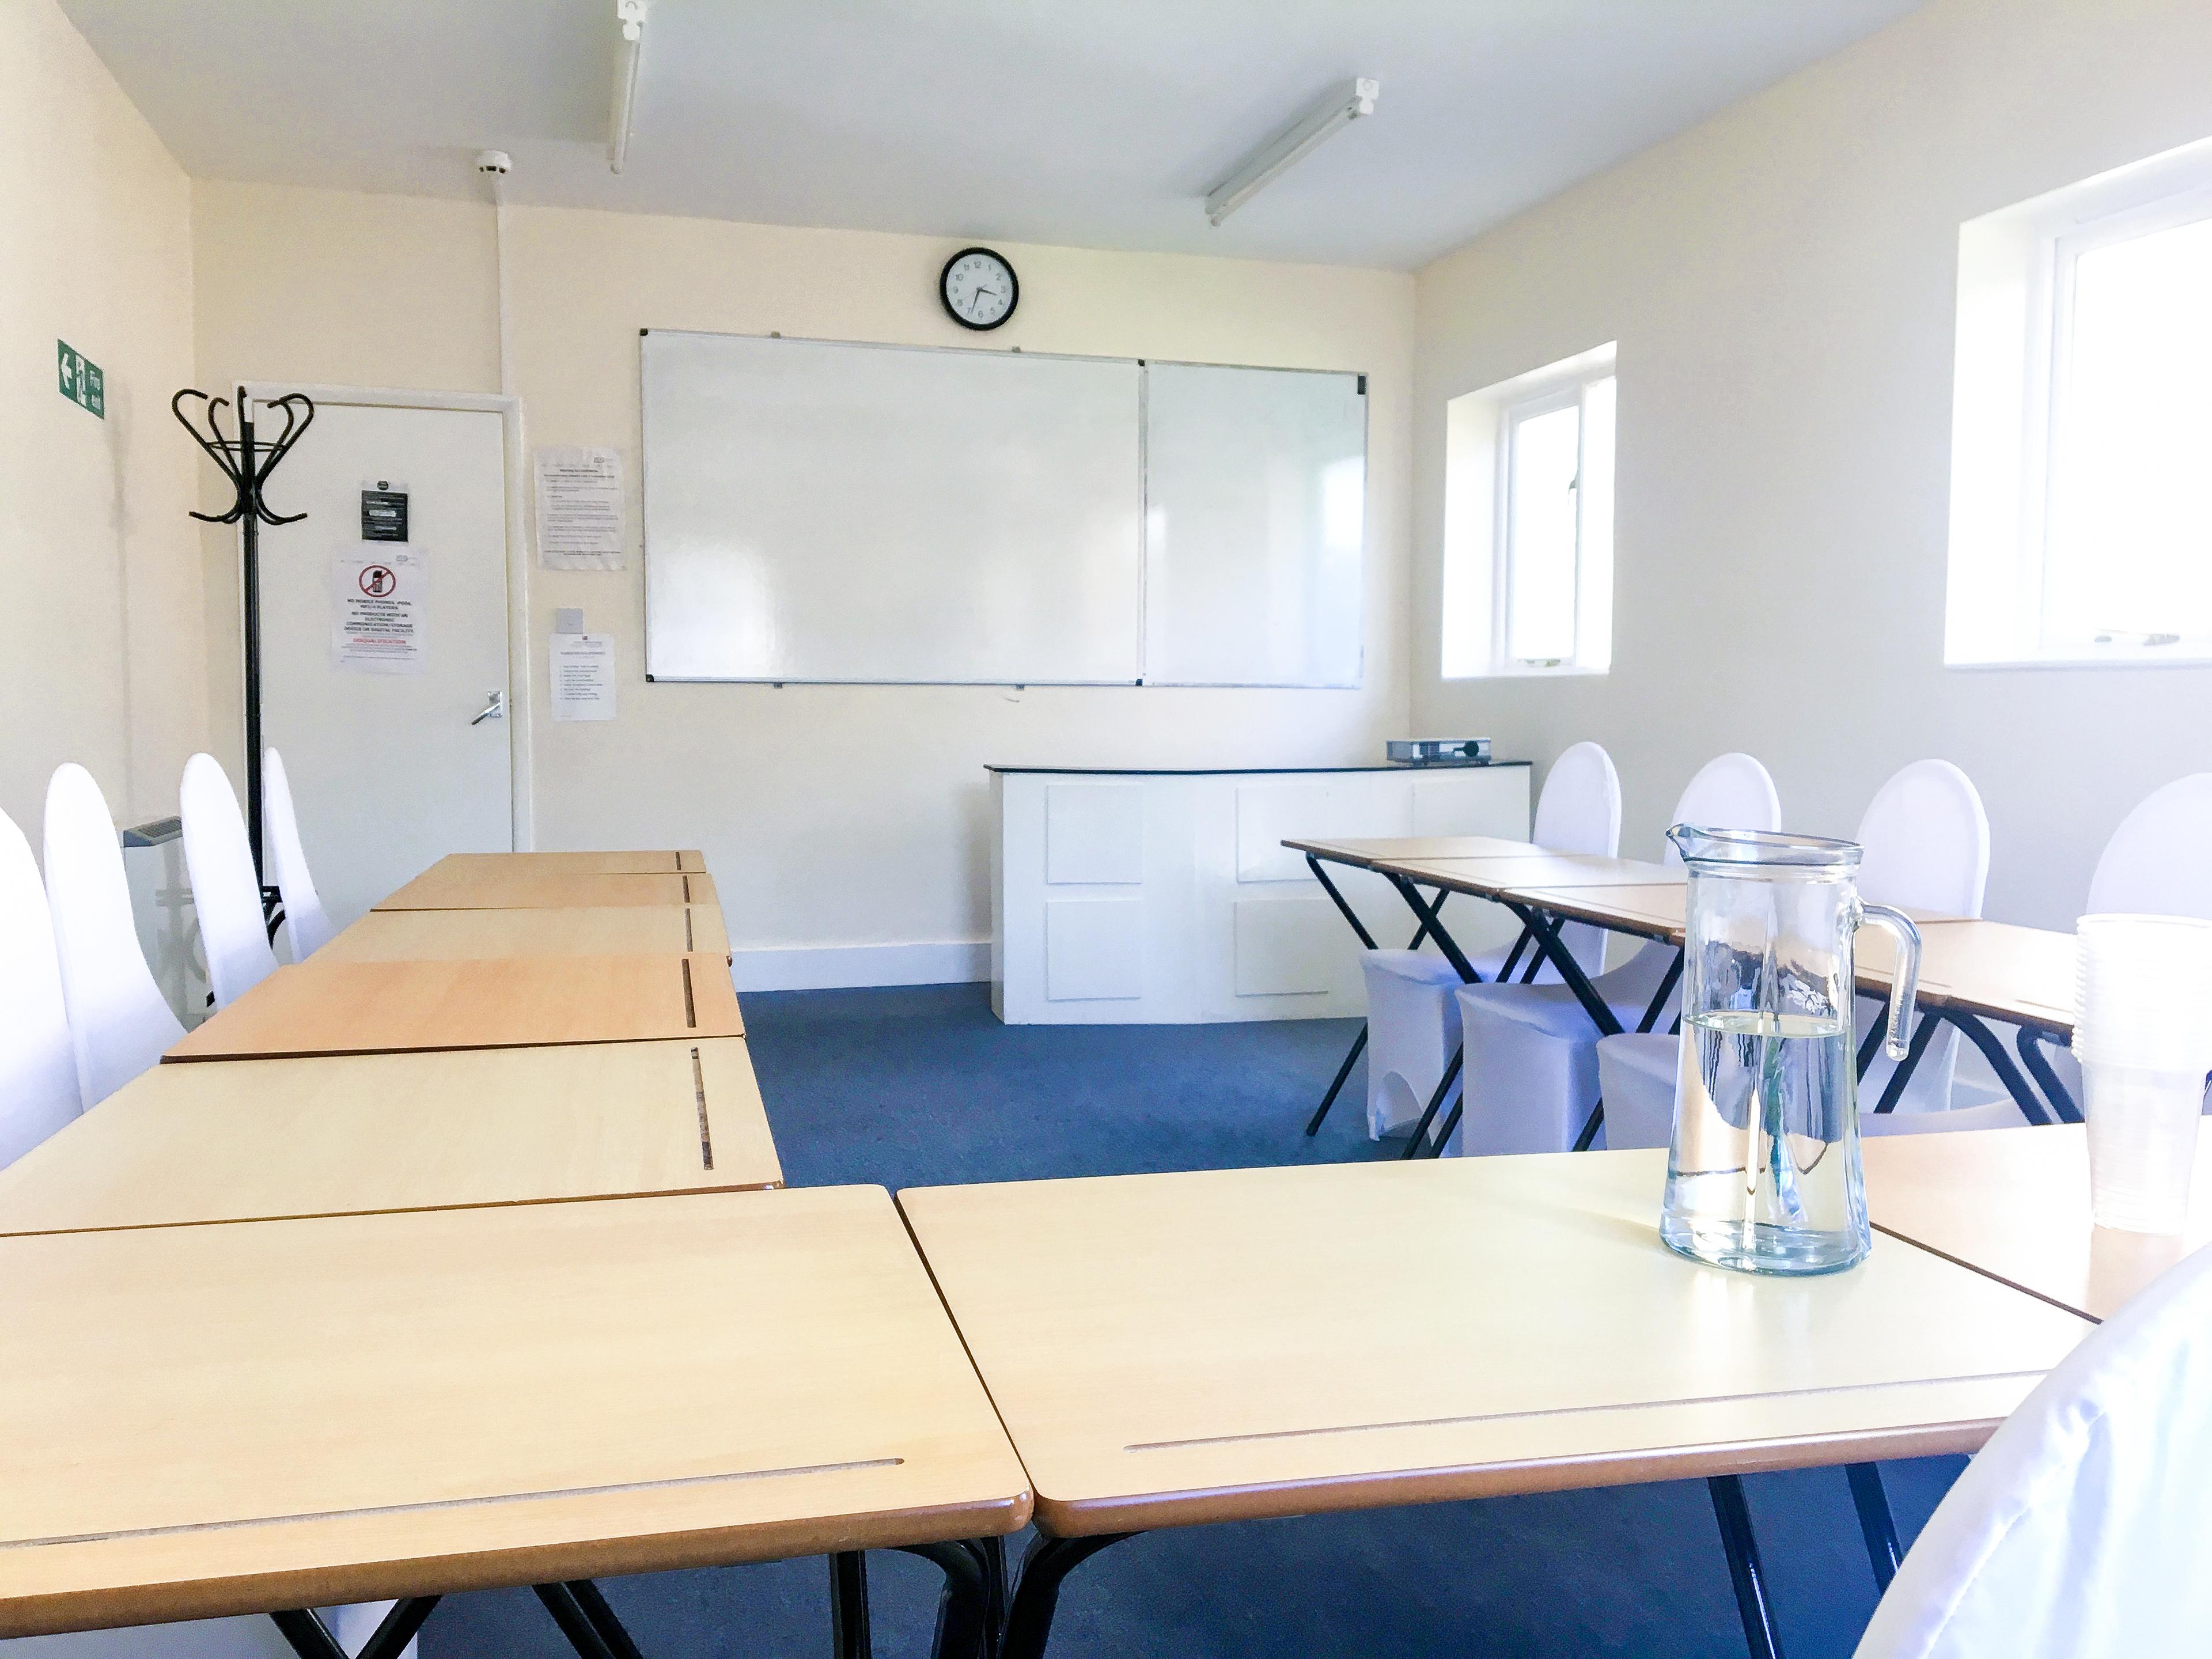 My Meeting Space - North London College, Meeting Room / Classroom 105 photo #3